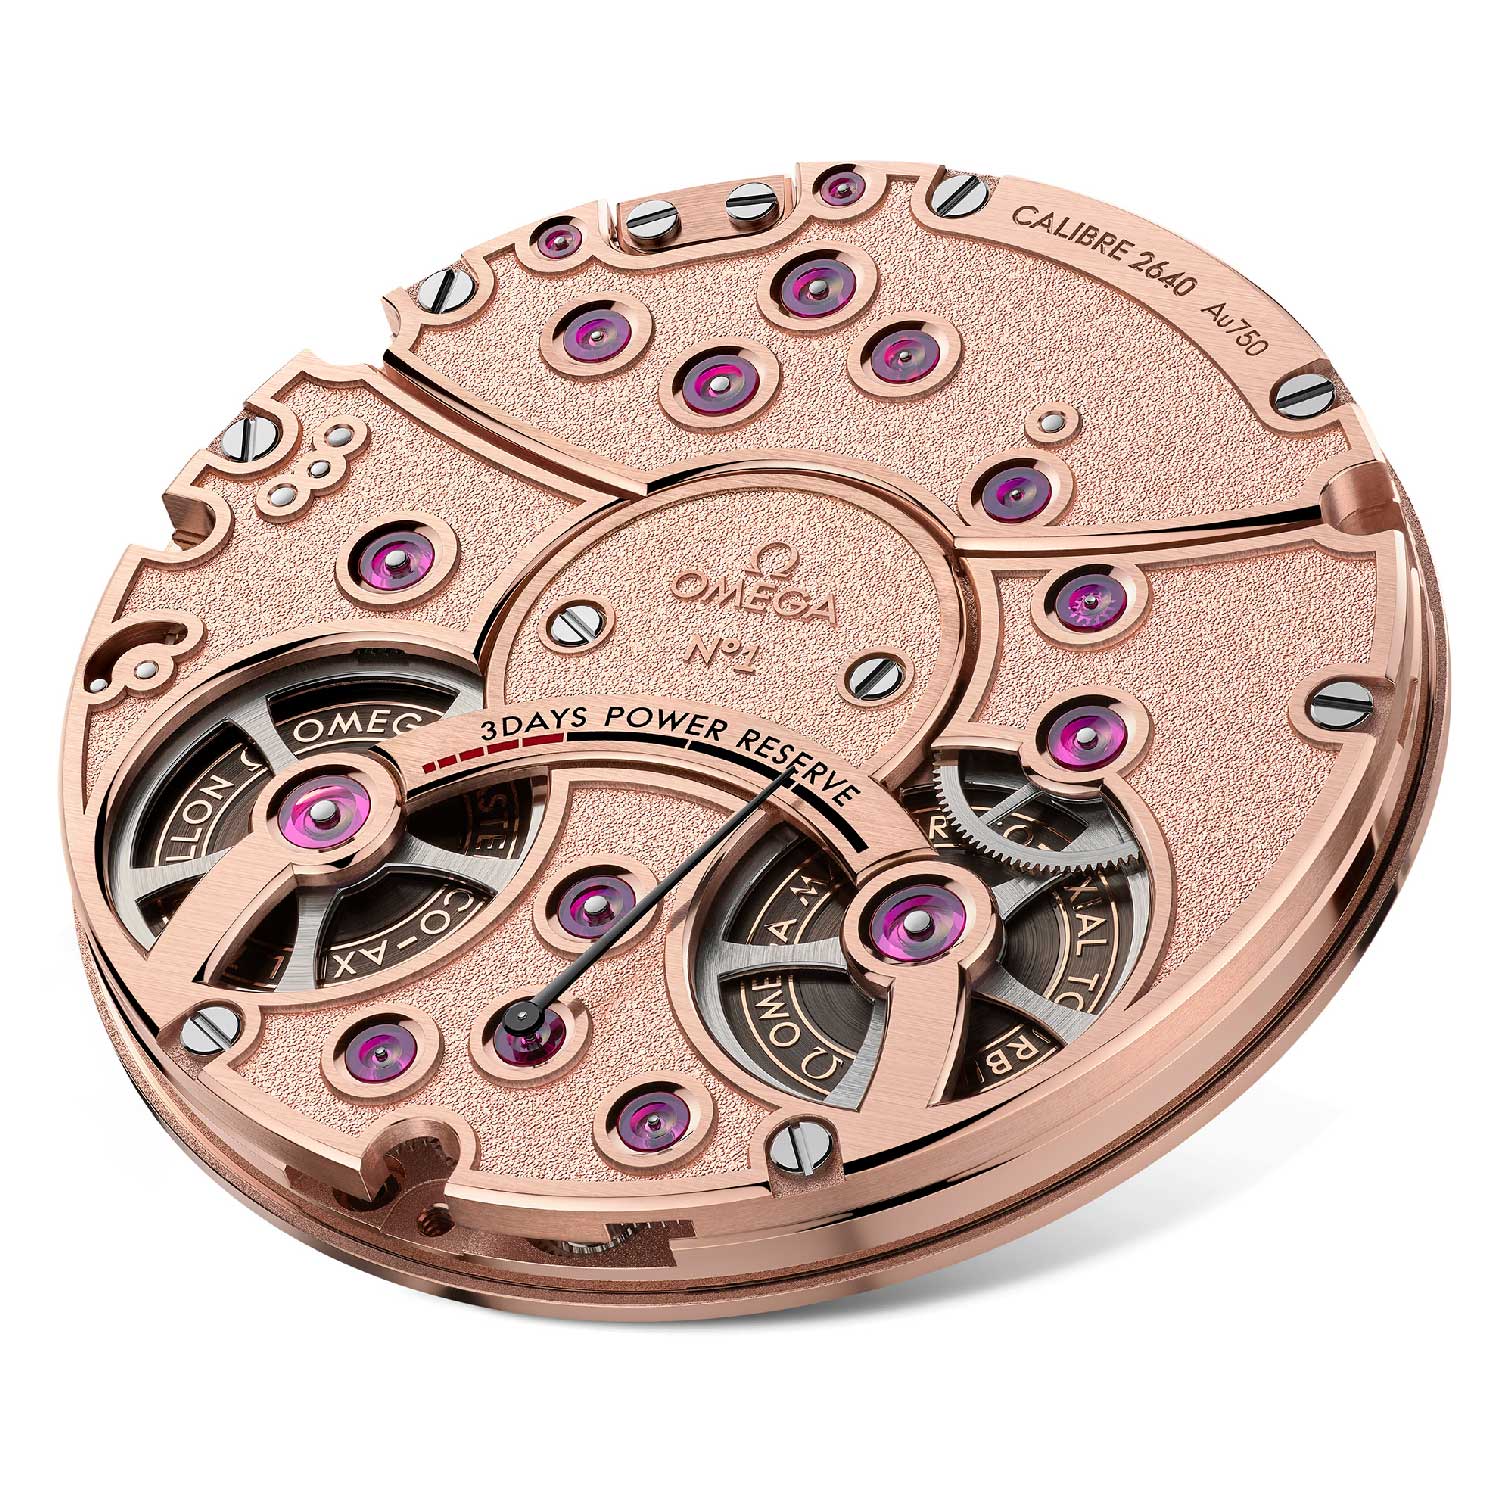 From the transparent case back, the finely decorated movement and the power reserve indicator can be viewed.